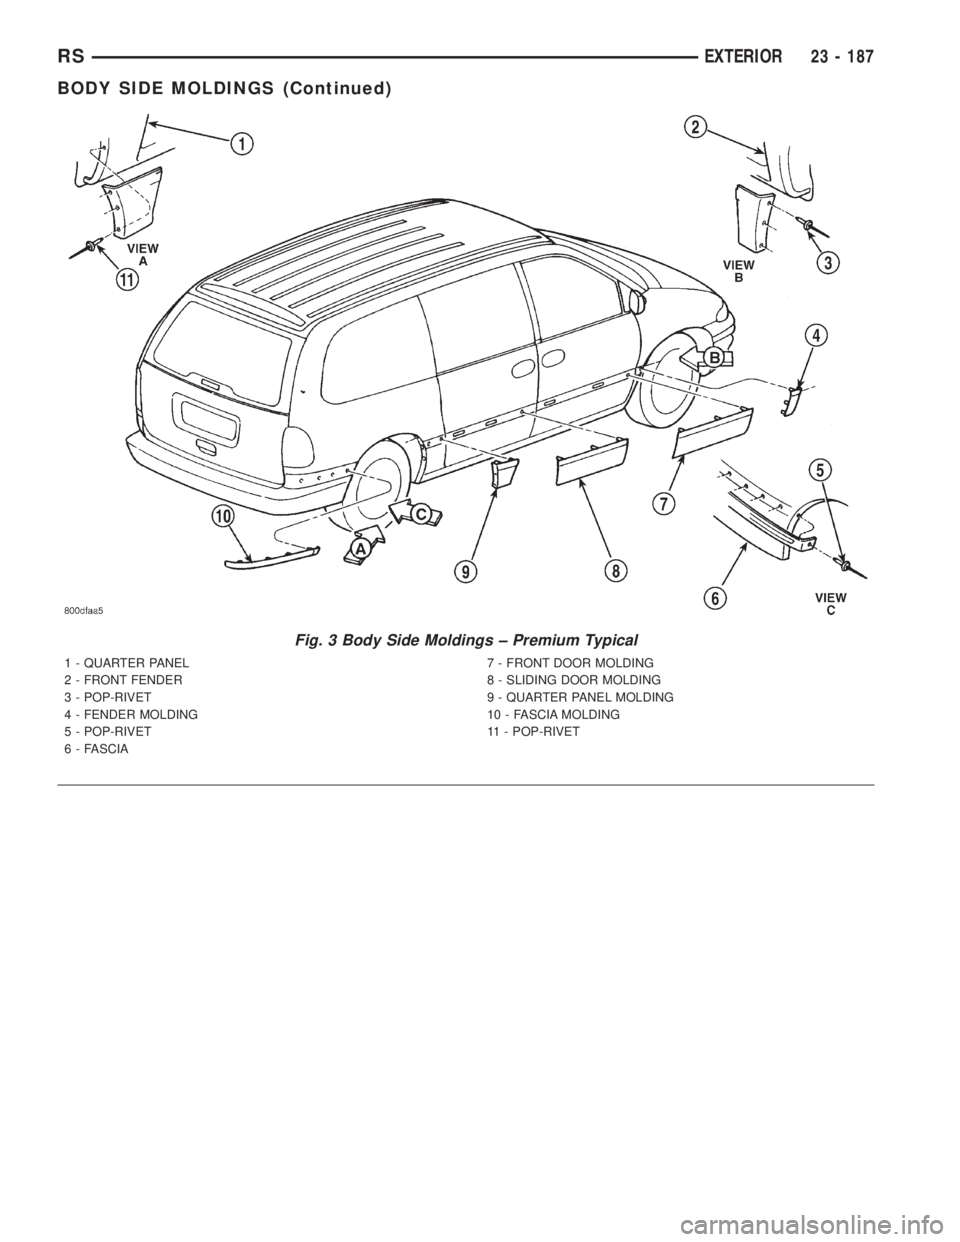 CHRYSLER VOYAGER 2001  Service Manual Fig. 3 Body Side Moldings ± Premium Typical
1 - QUARTER PANEL
2 - FRONT FENDER
3 - POP-RIVET
4 - FENDER MOLDING
5 - POP-RIVET
6 - FASCIA7 - FRONT DOOR MOLDING
8 - SLIDING DOOR MOLDING
9 - QUARTER PAN